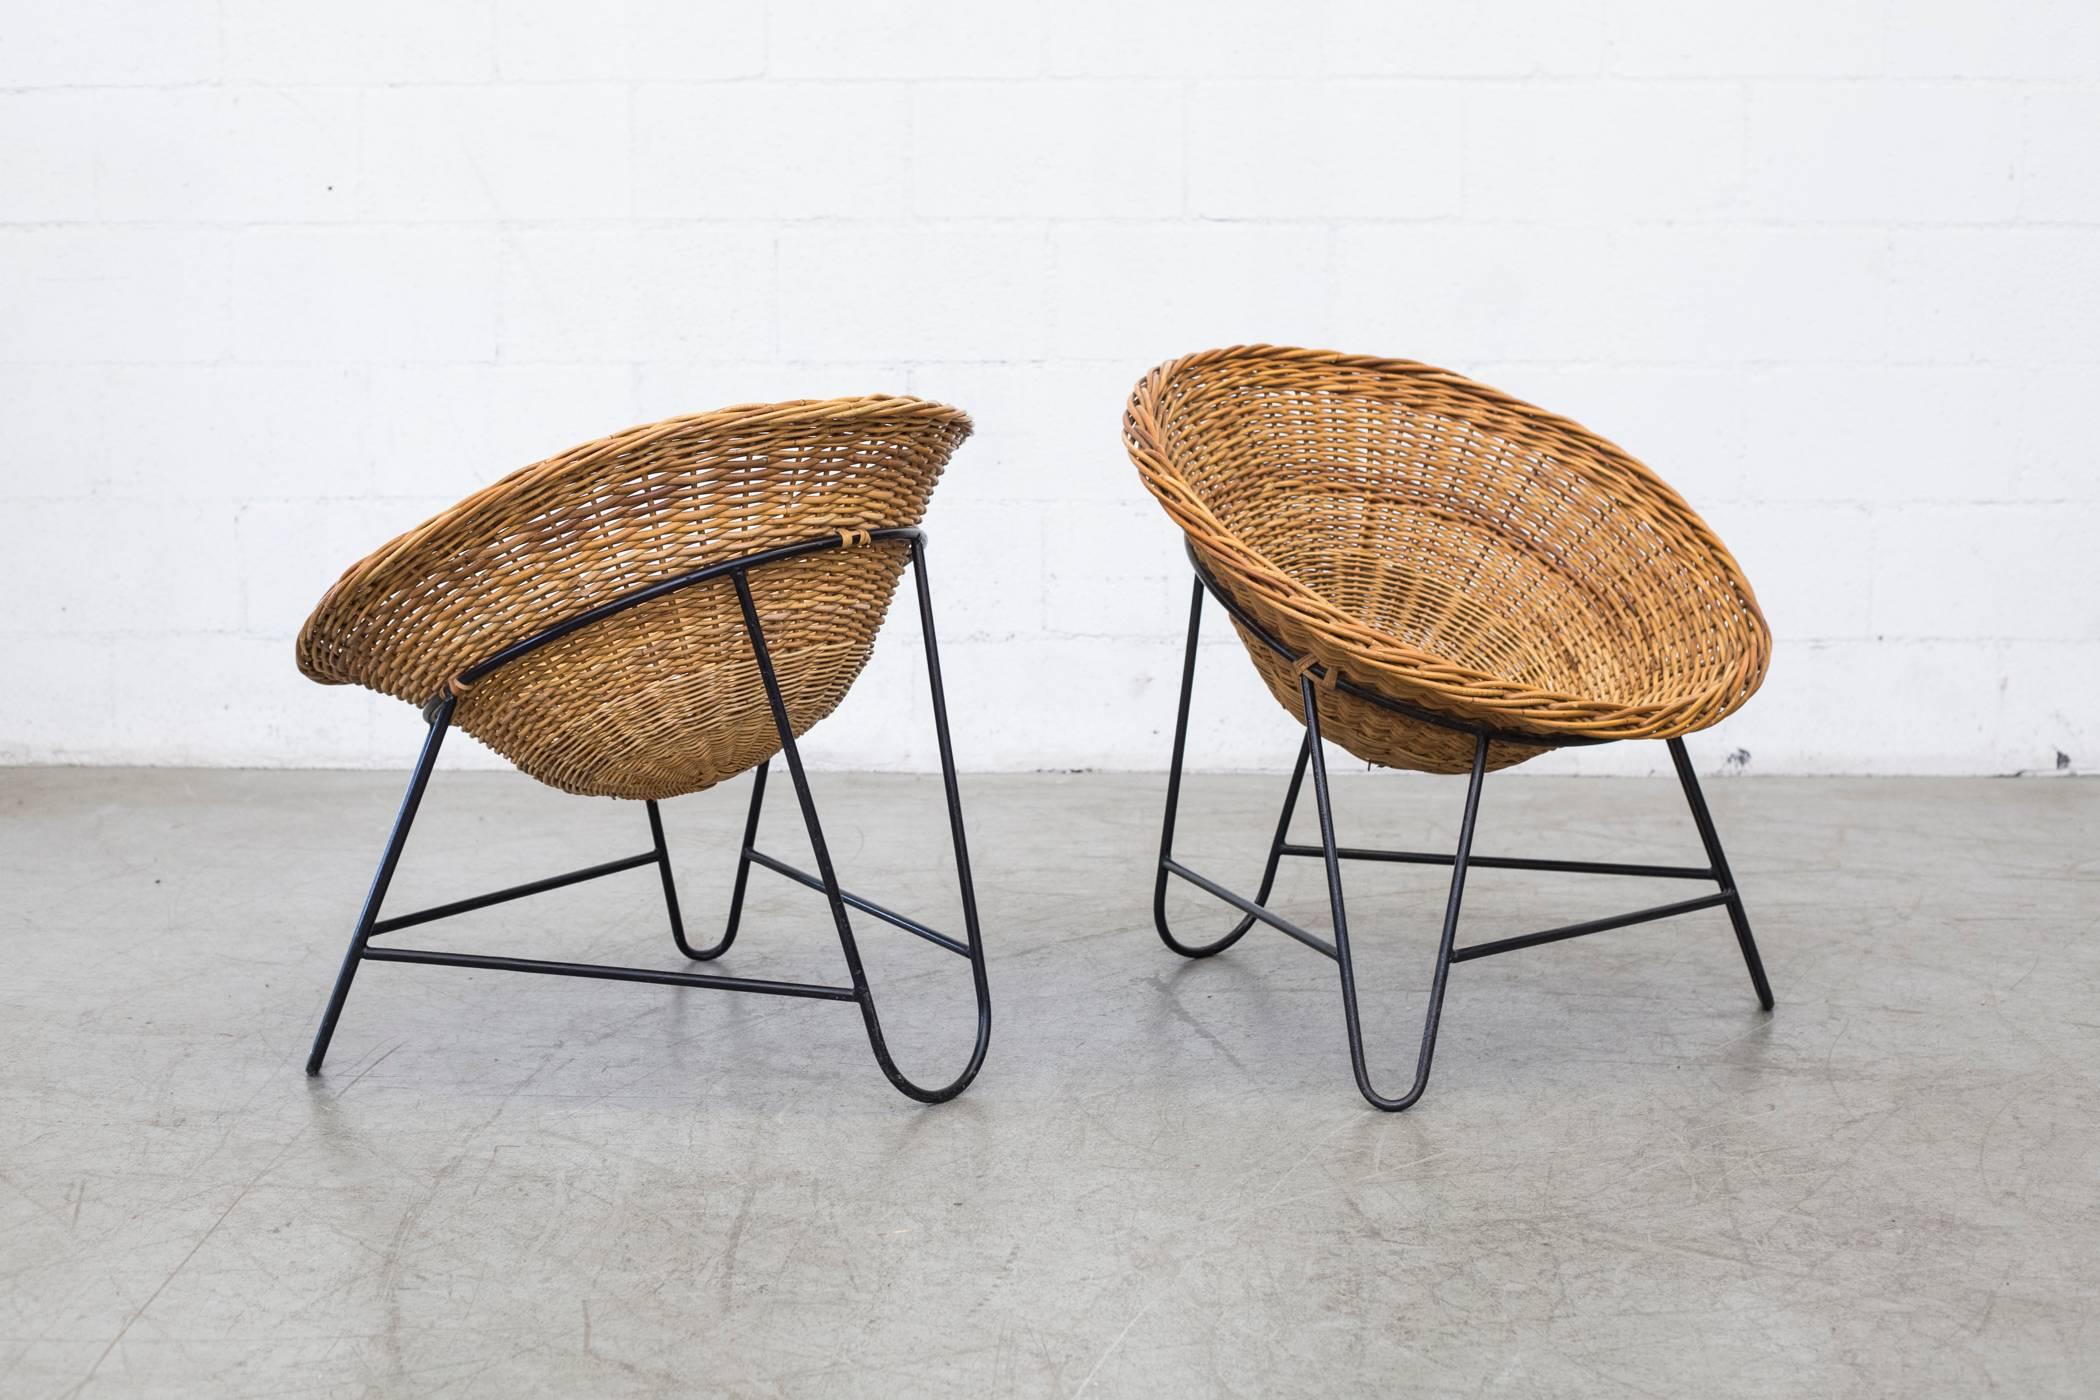 Enameled Pair of Jacques Adnet Style Woven Basket Chairs